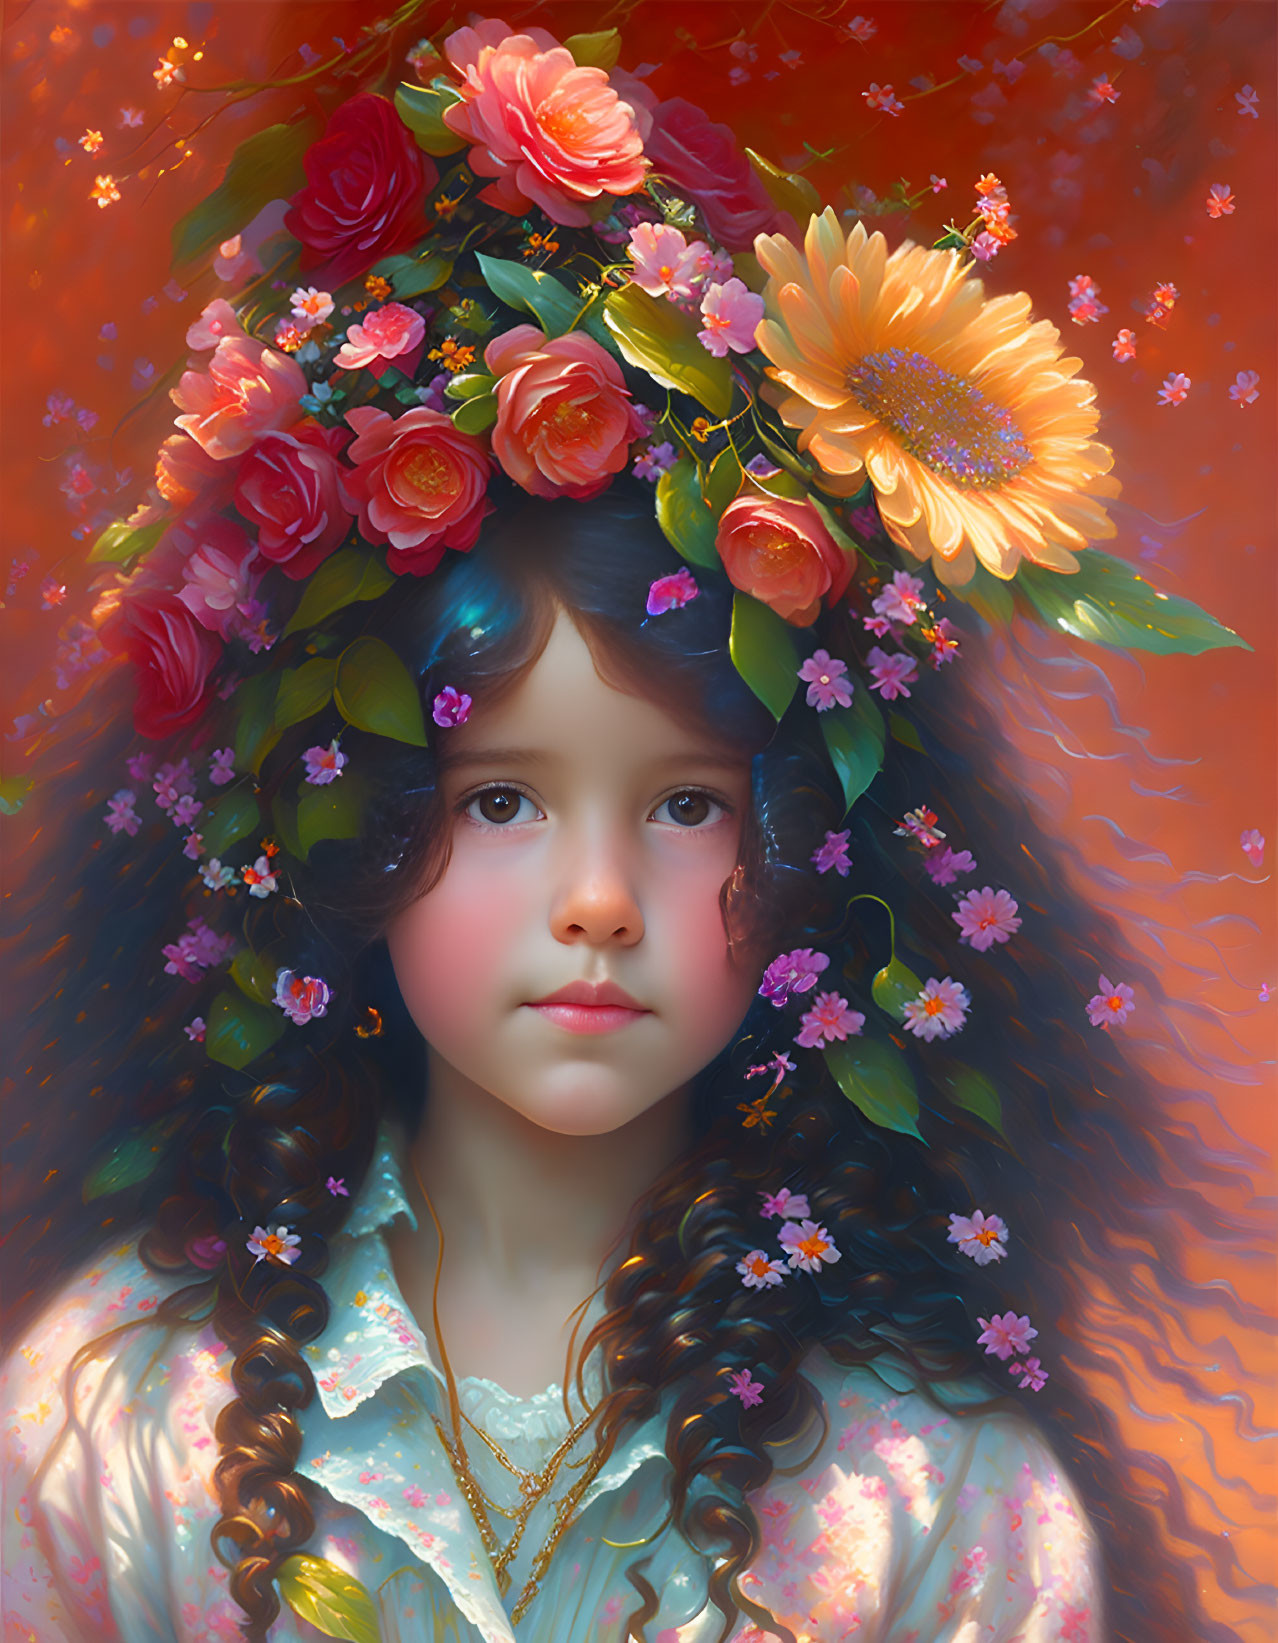 Girl with flowers in her hair